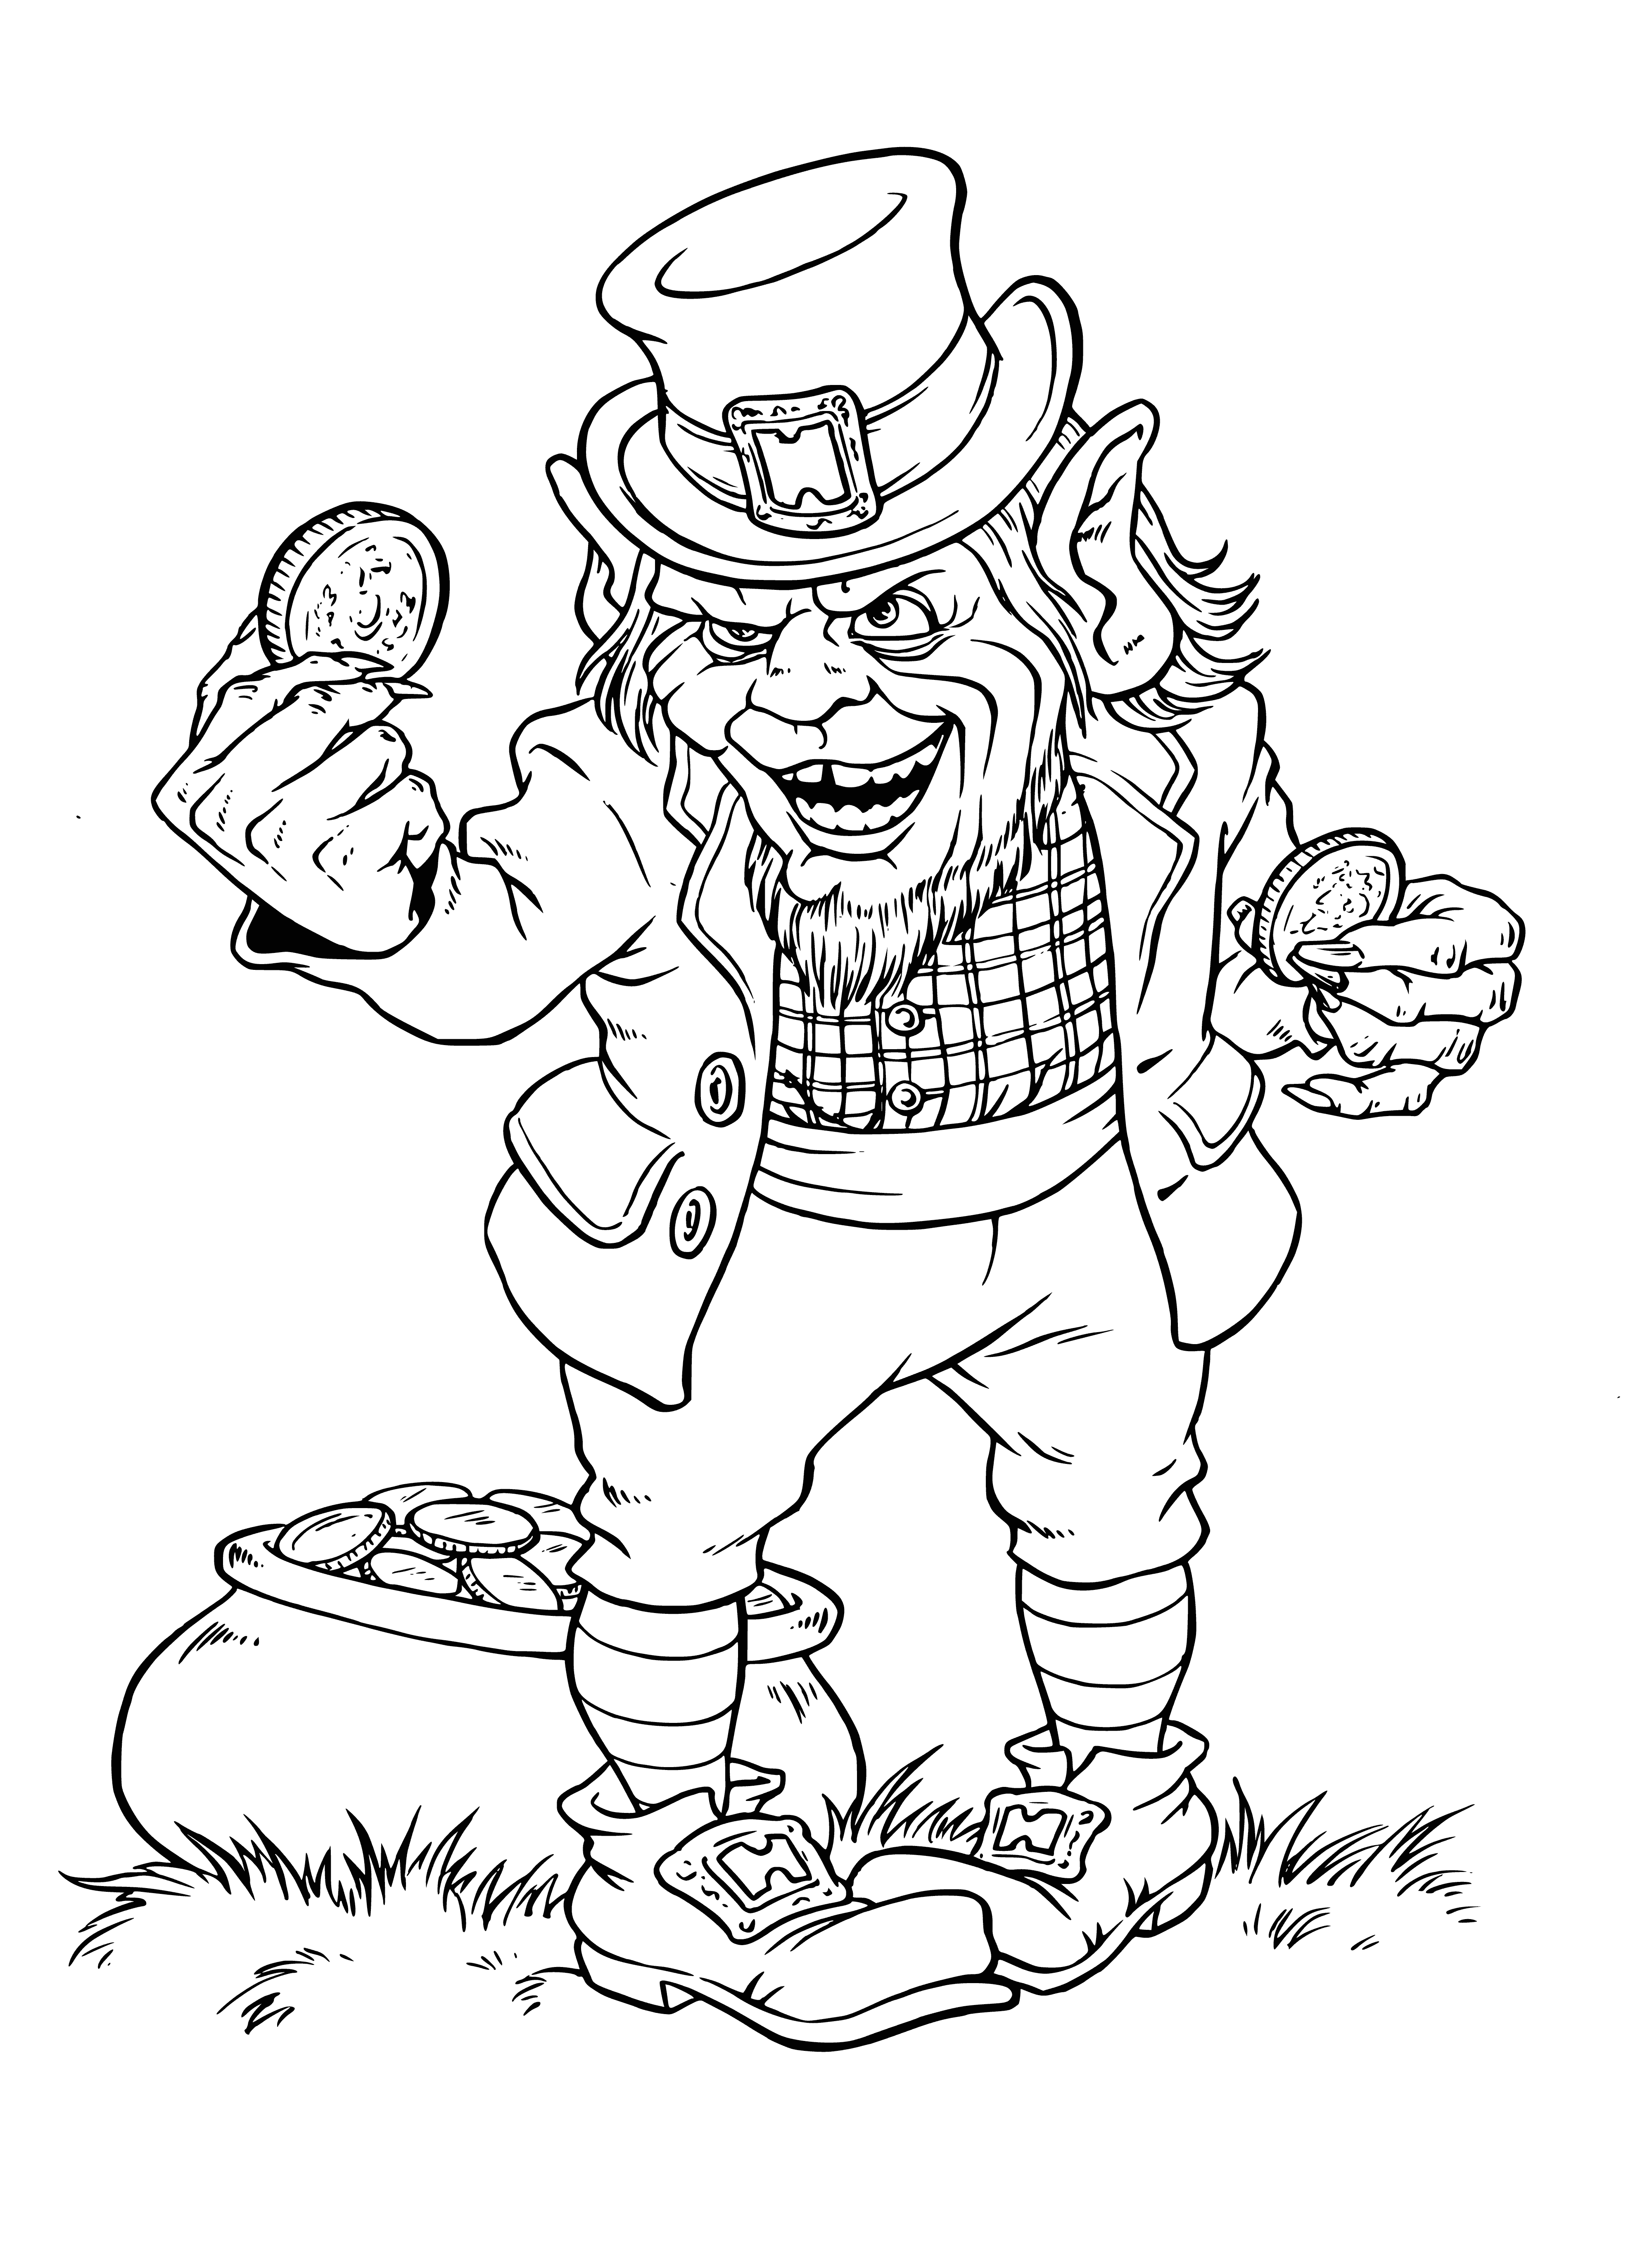 Evil troll coloring page